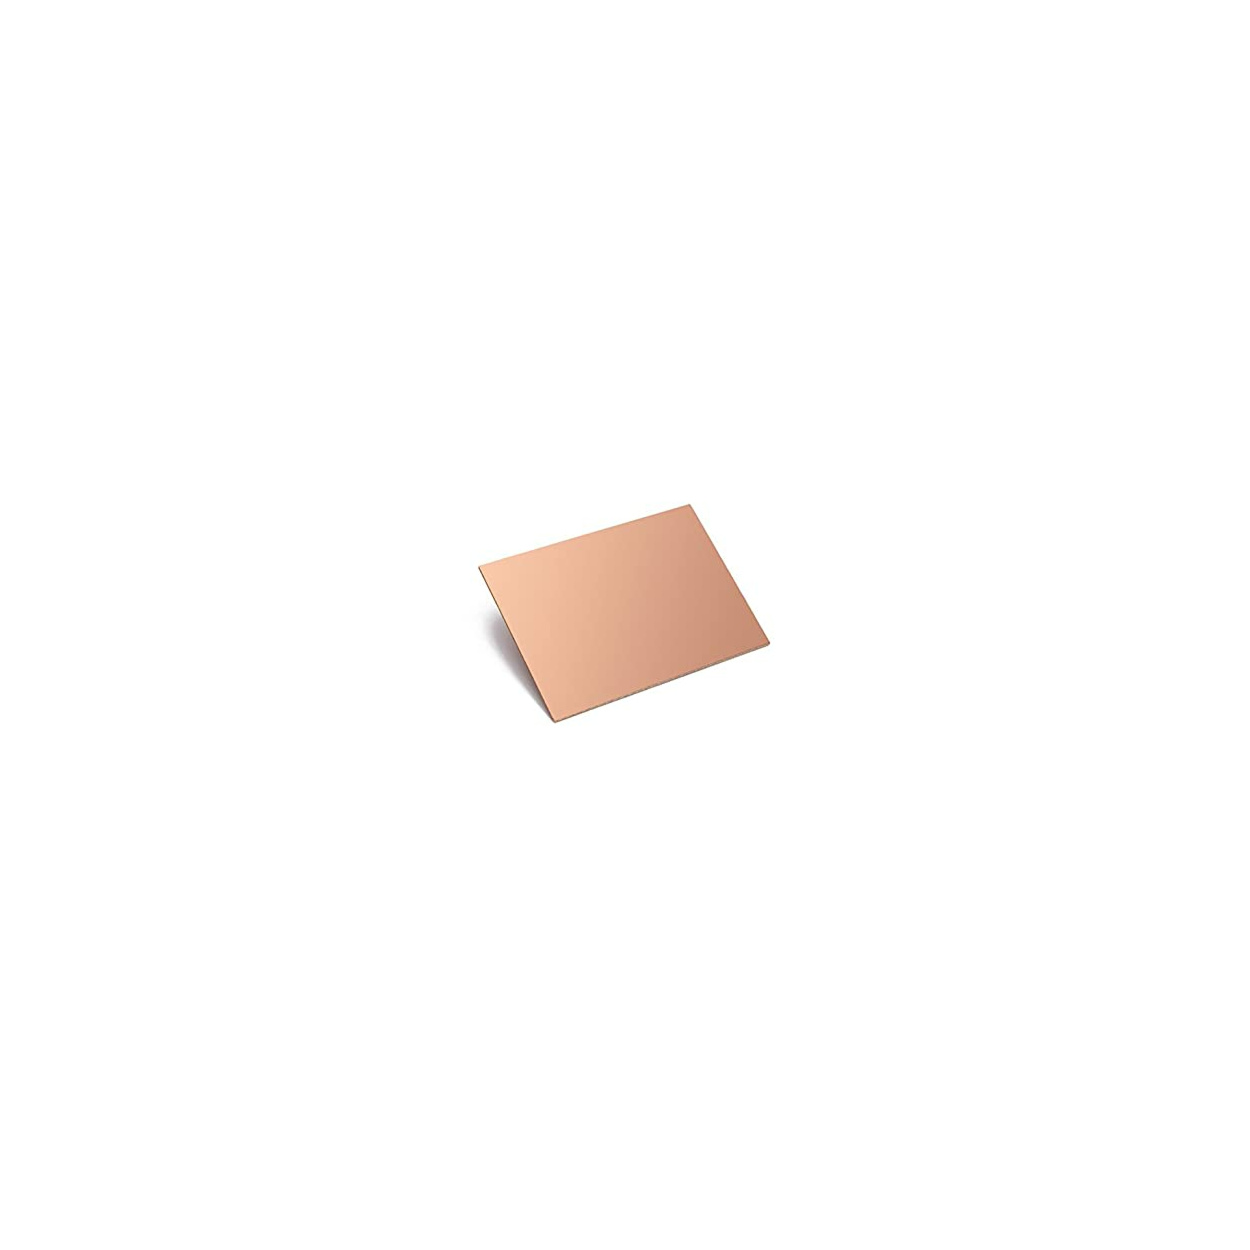 Probots 8X4 inches Phenolic Double Sided Plain Copper Clad Board Buy ...